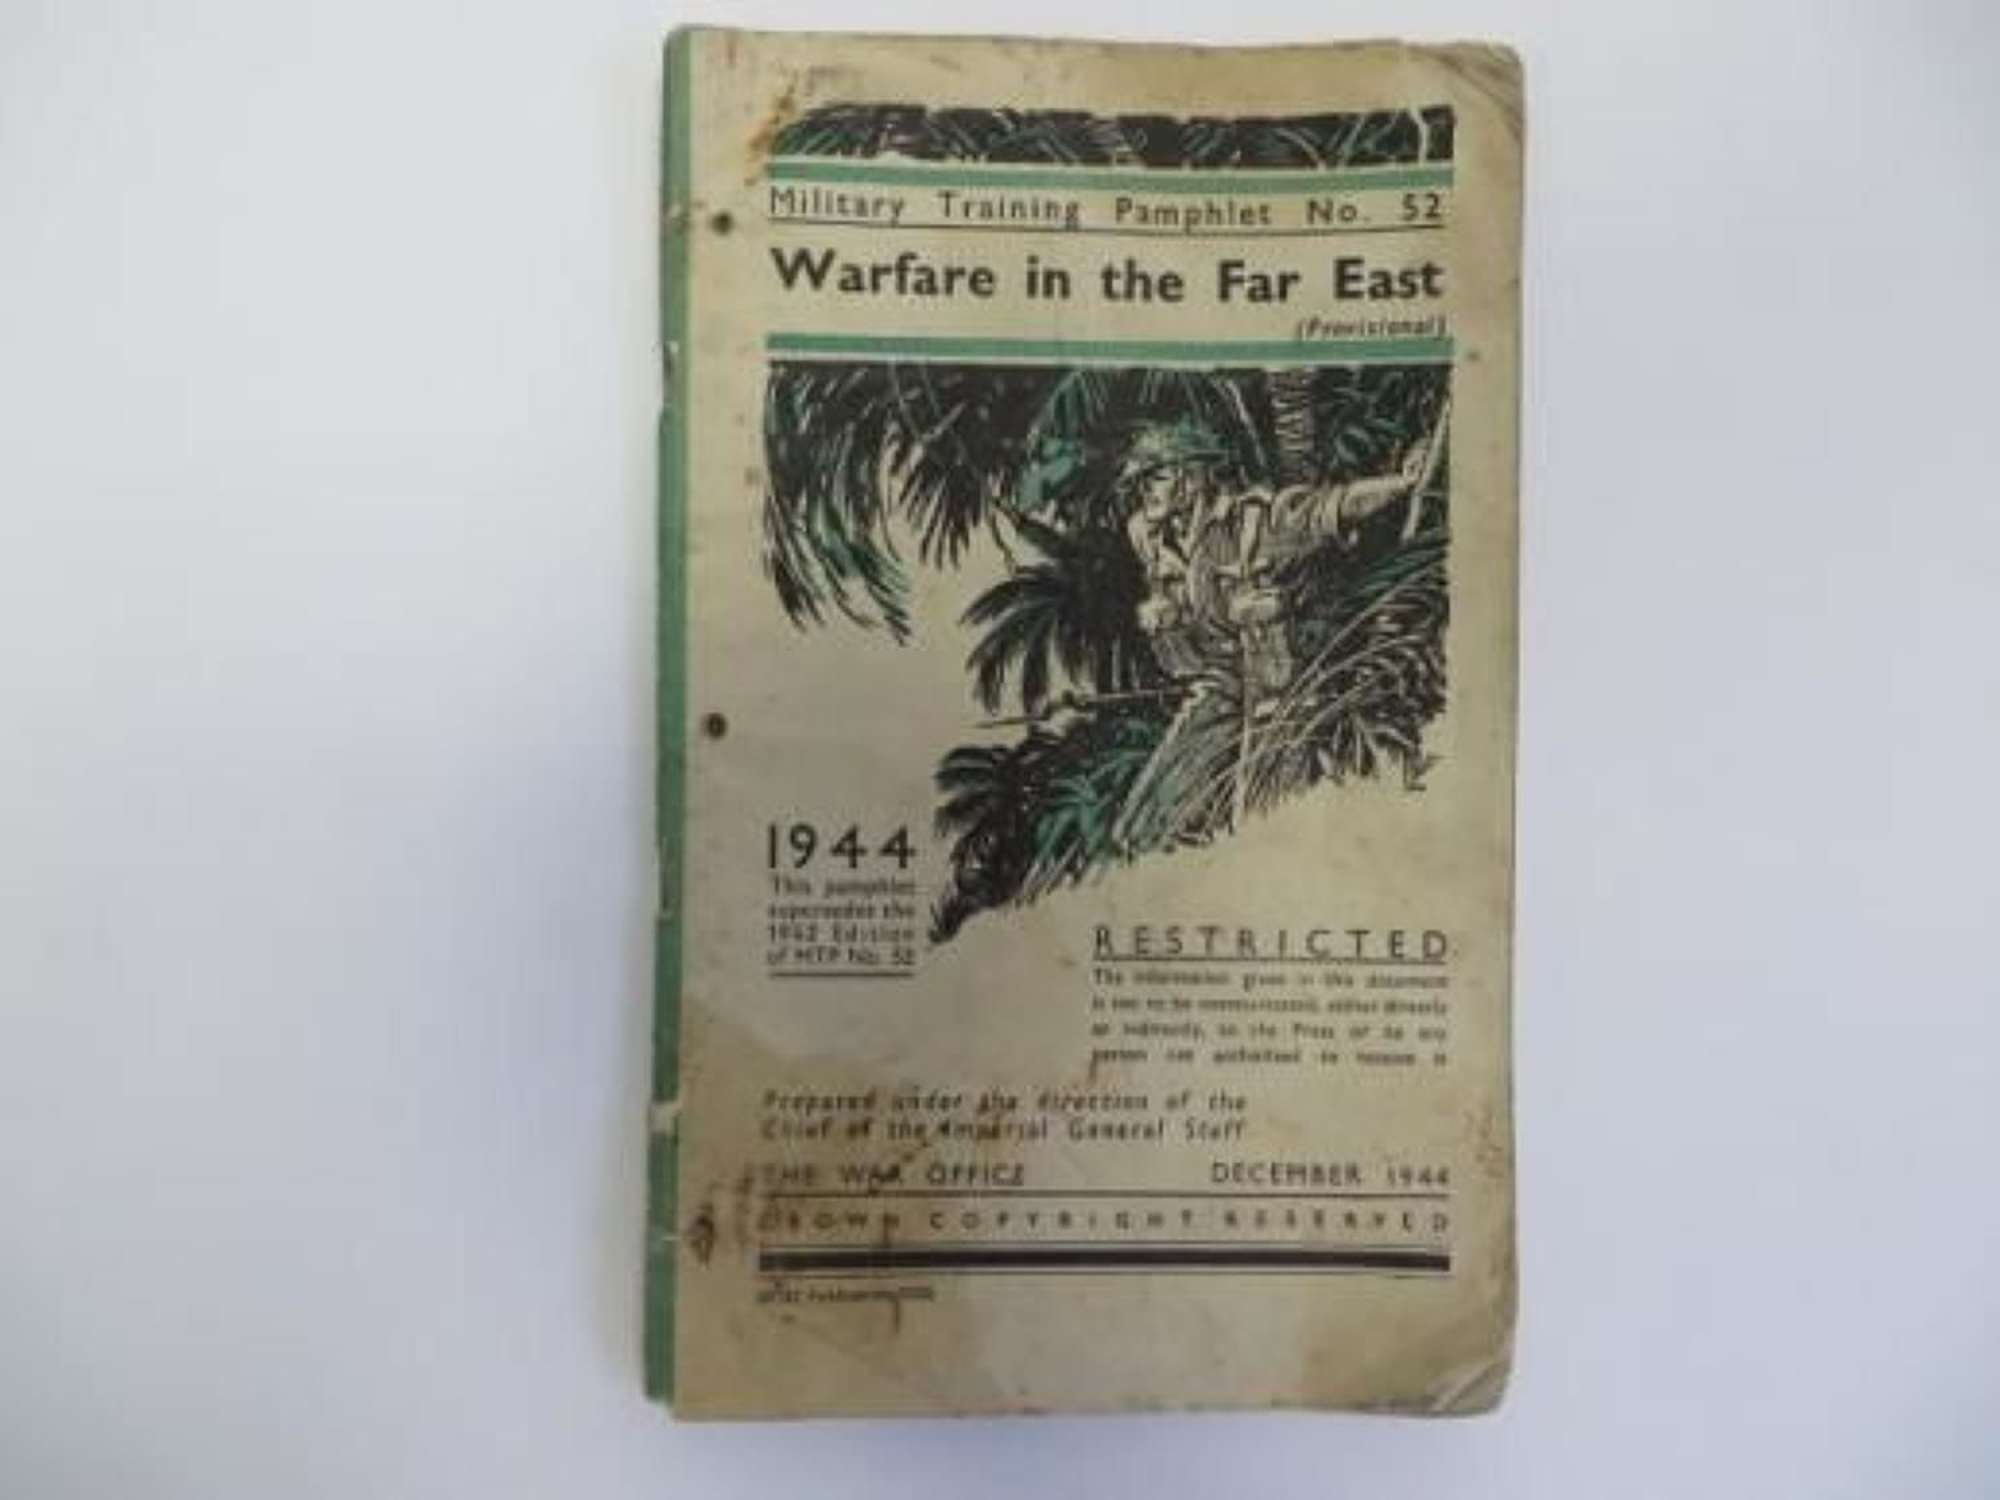 Rare 1944 Warfare in the Far East No52 Pamphlet